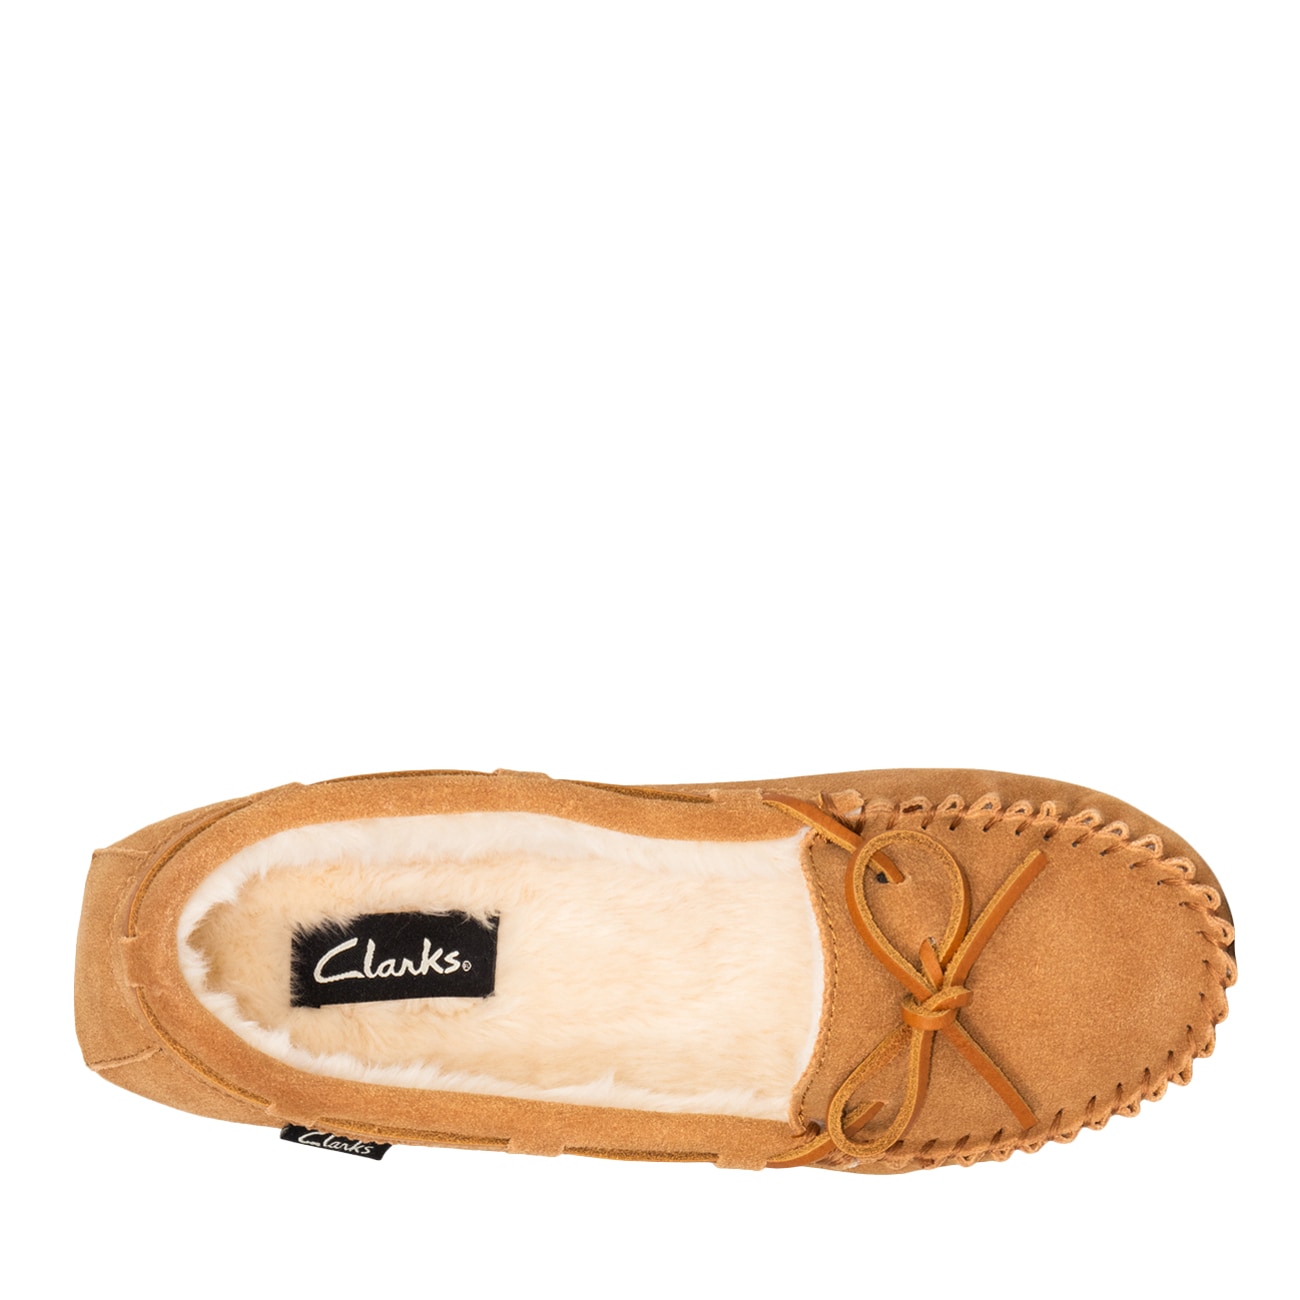 Clarks Moccasin Slipper | The Shoe Company